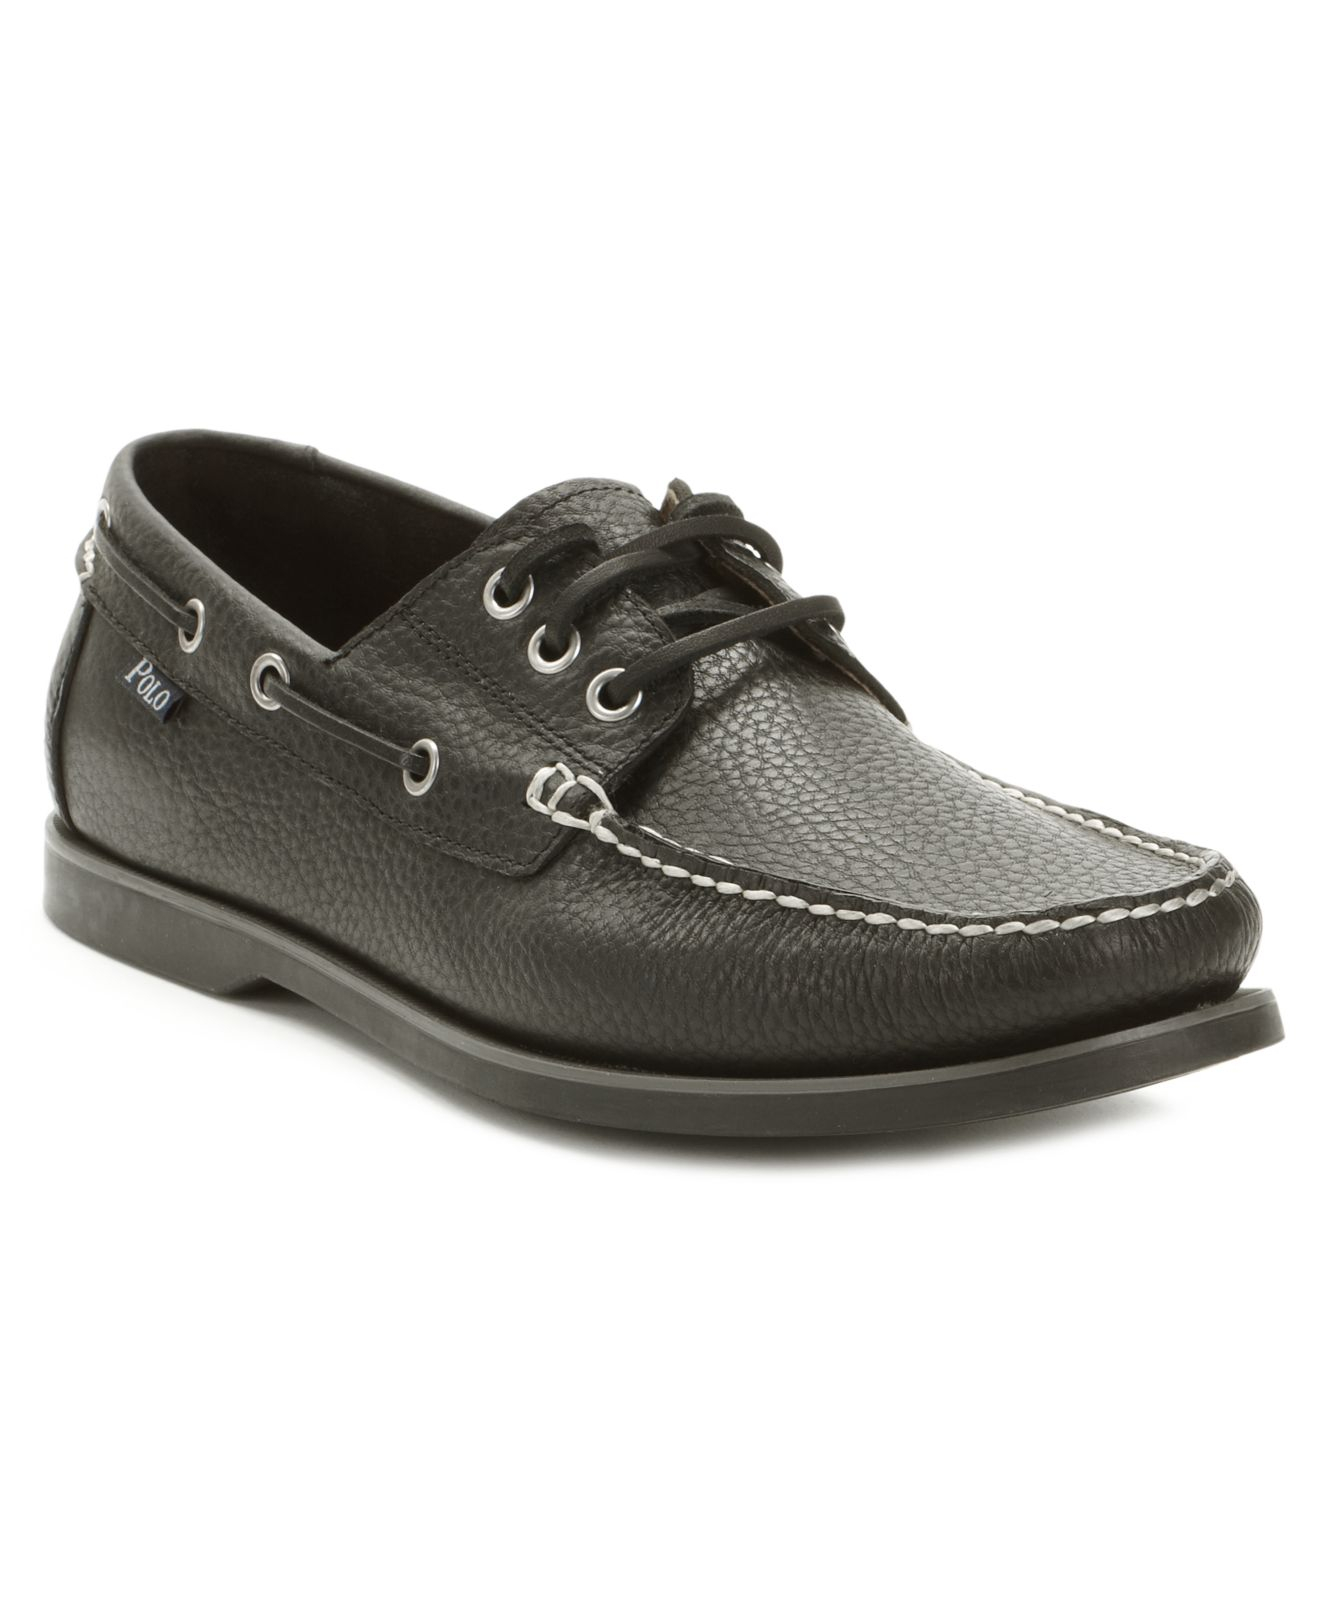 Polo ralph lauren Bienne Tumbled Leather Boat Shoes in